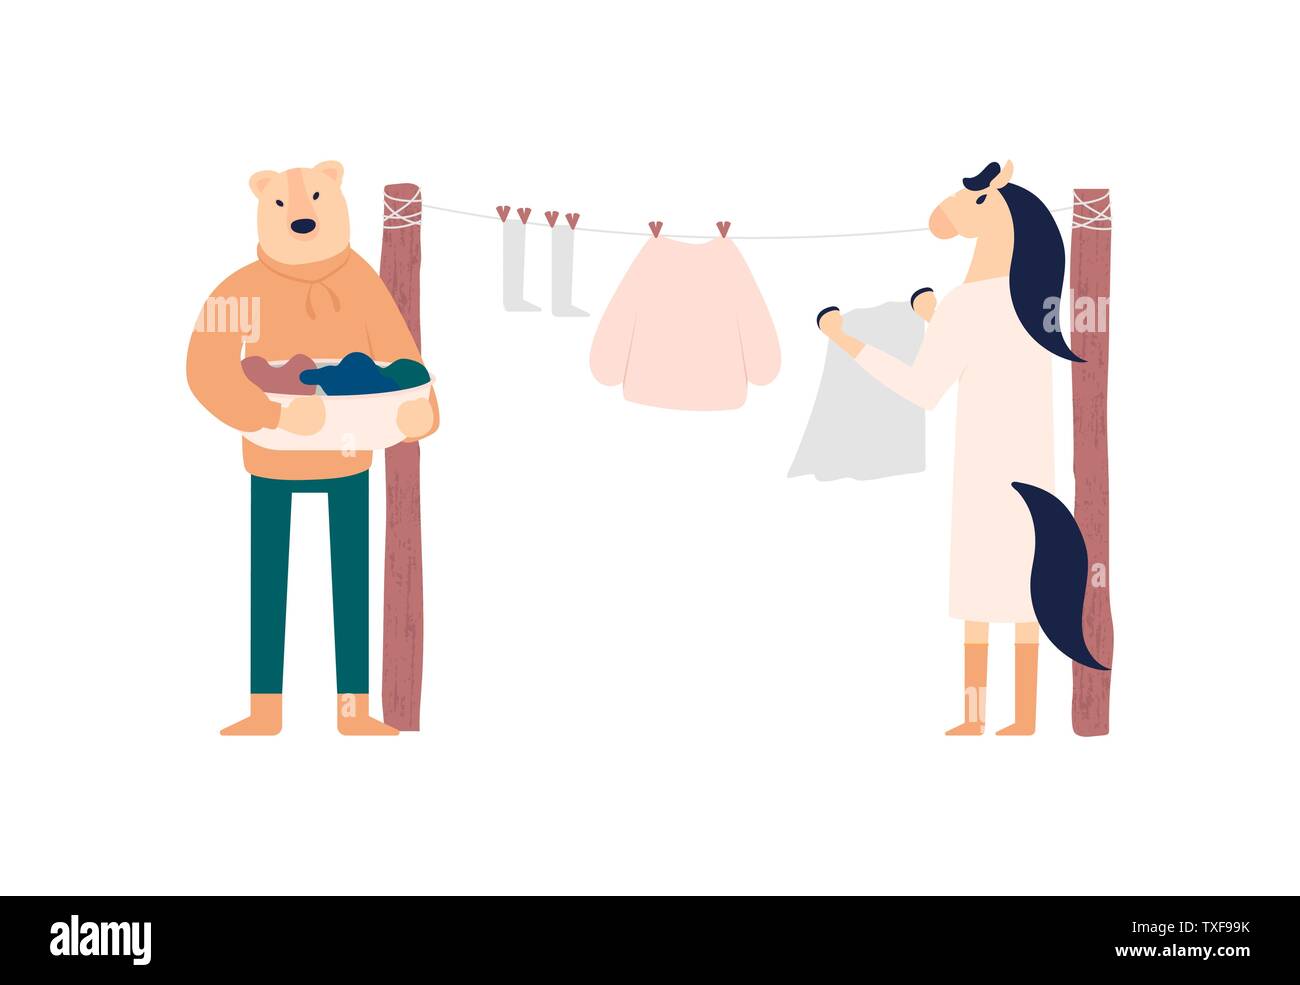 Household chores vector illustration. Wife and husband hanging clothes to dry. Laundry day isolated clipart. Animal metaphors for boyfriend and girlfriend flat characters. Housekeeping poster concept Stock Vector